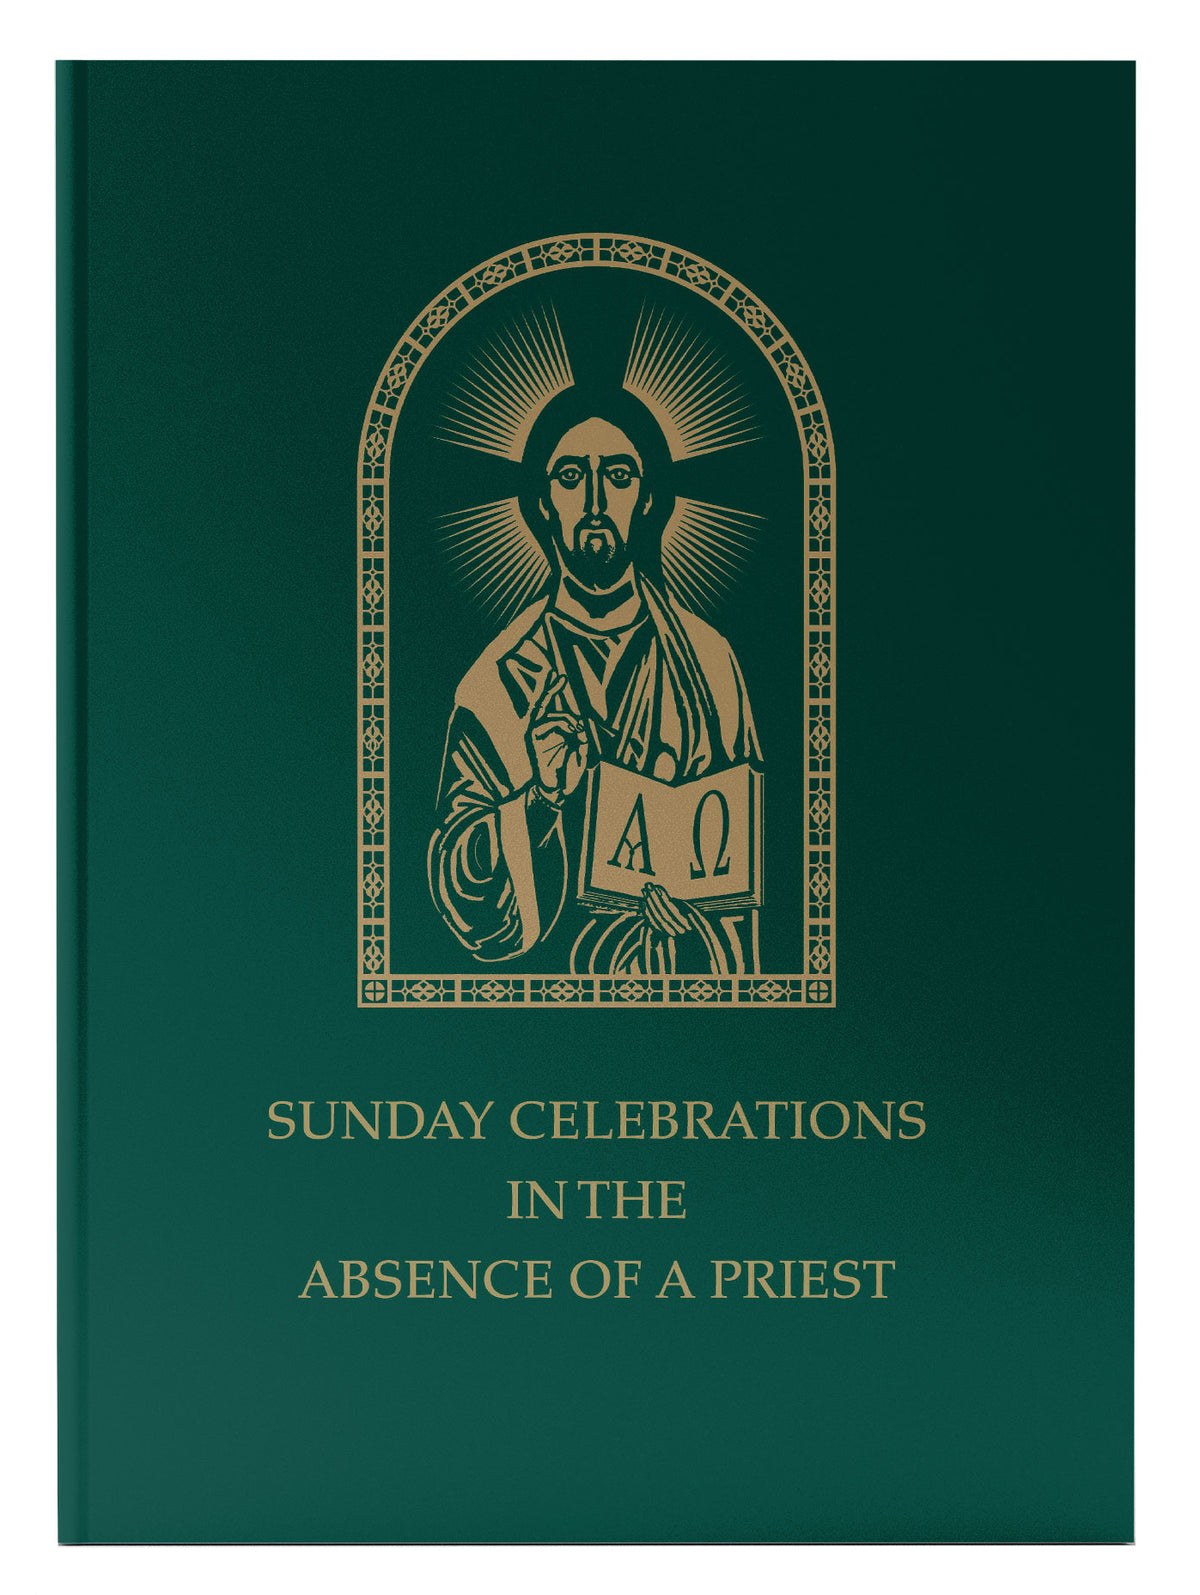 Sunday Celebrations in the Absence of a Priest